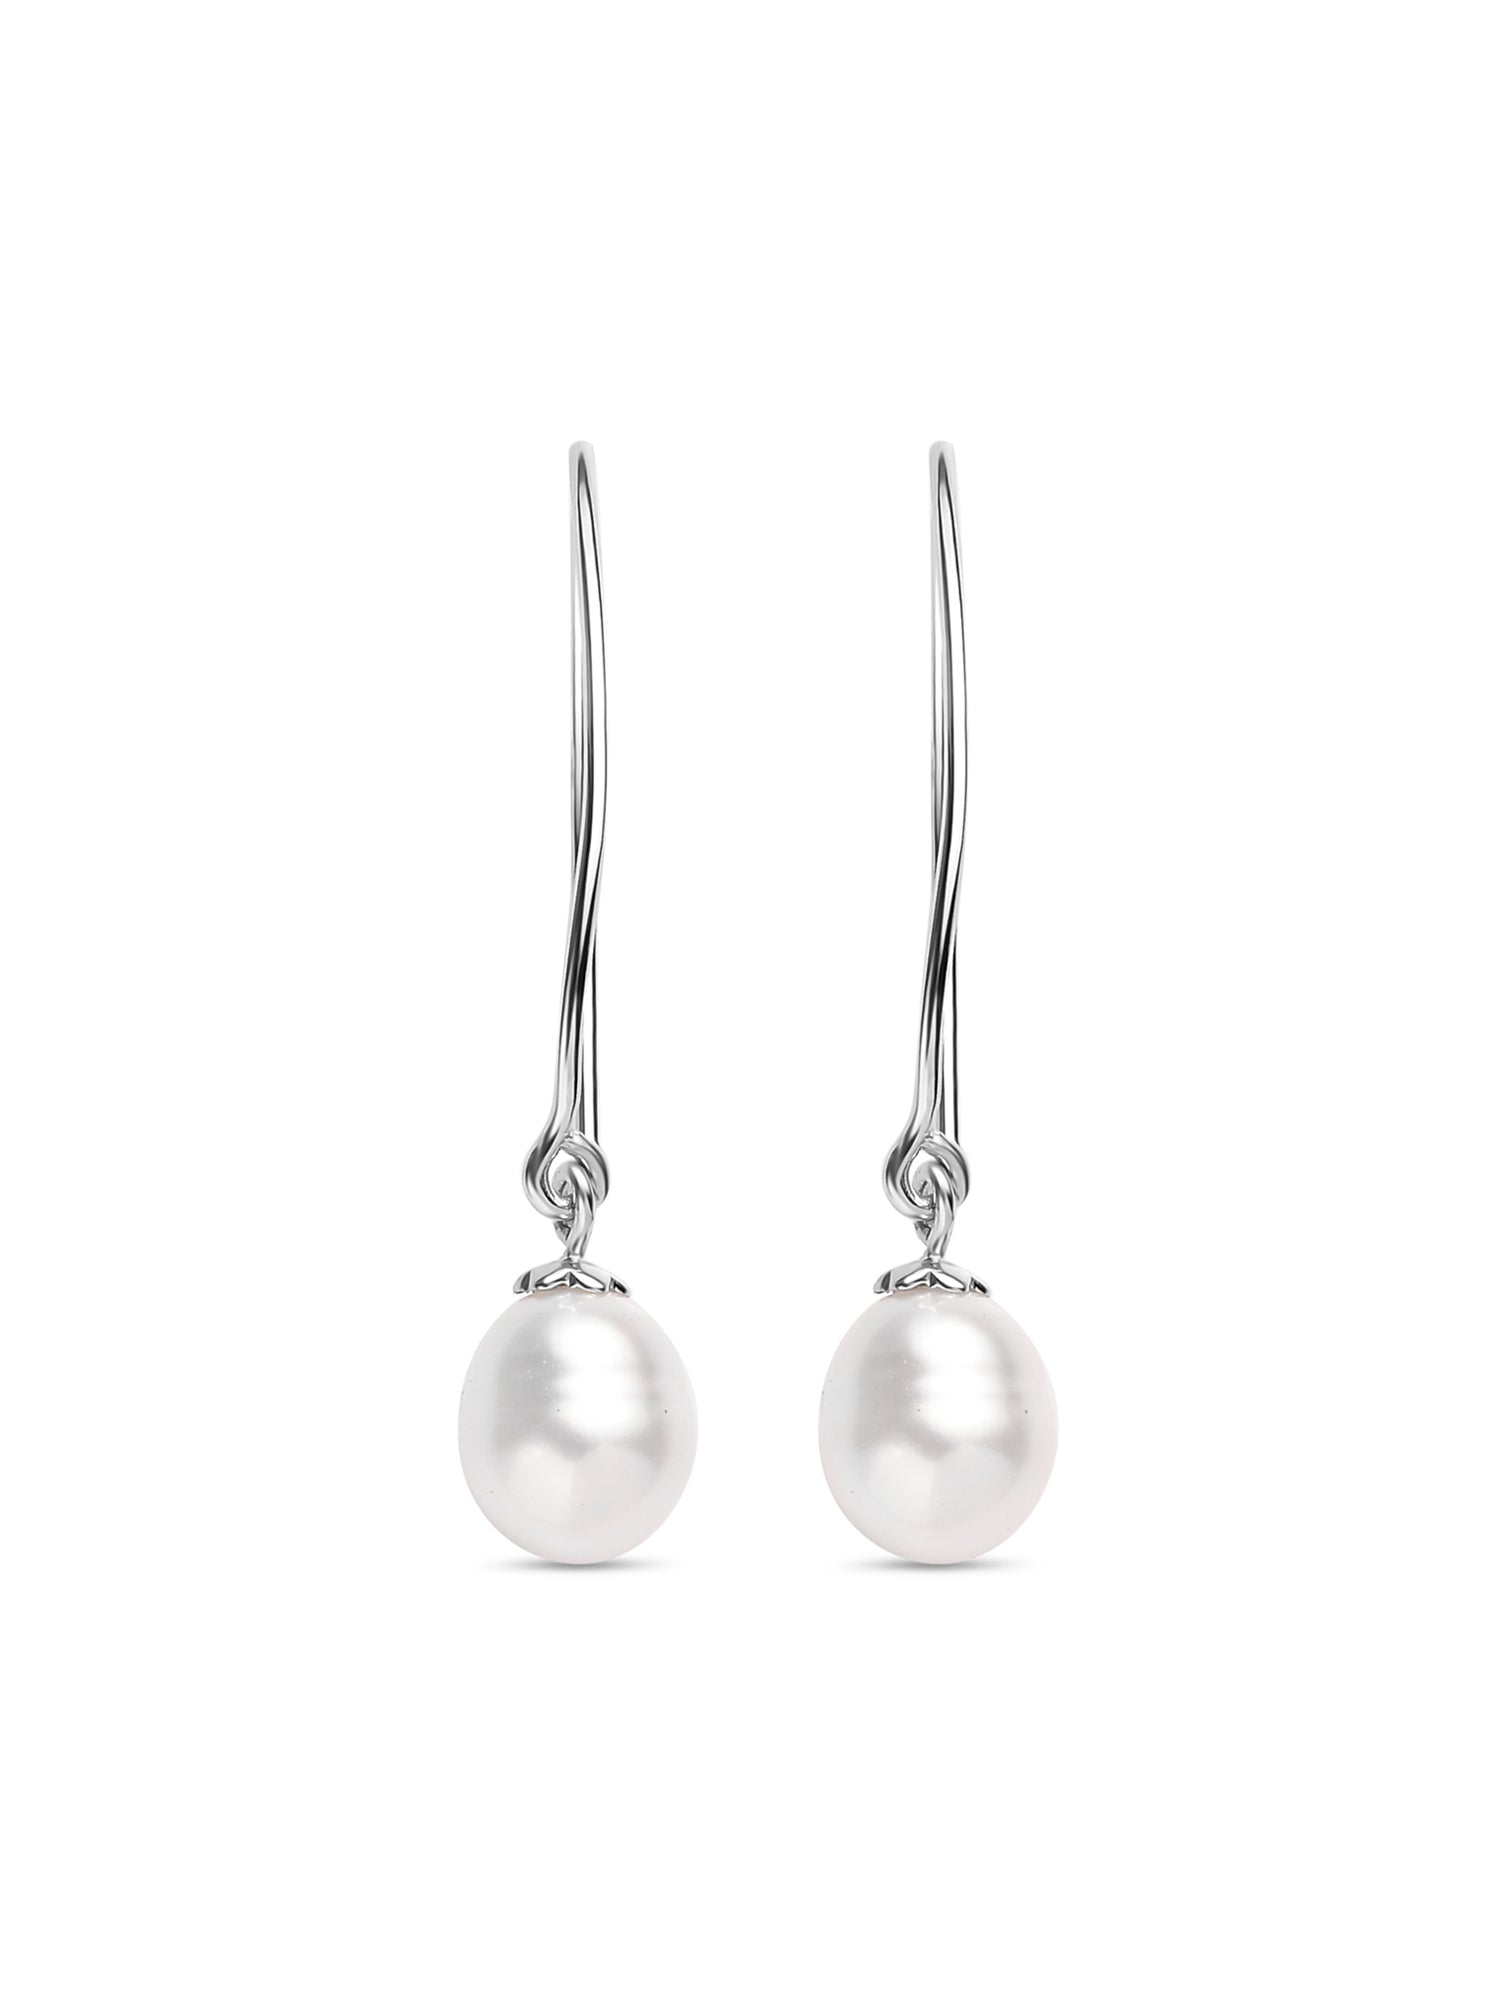 Real Pearl Drop Chic Earrings For Girls-3